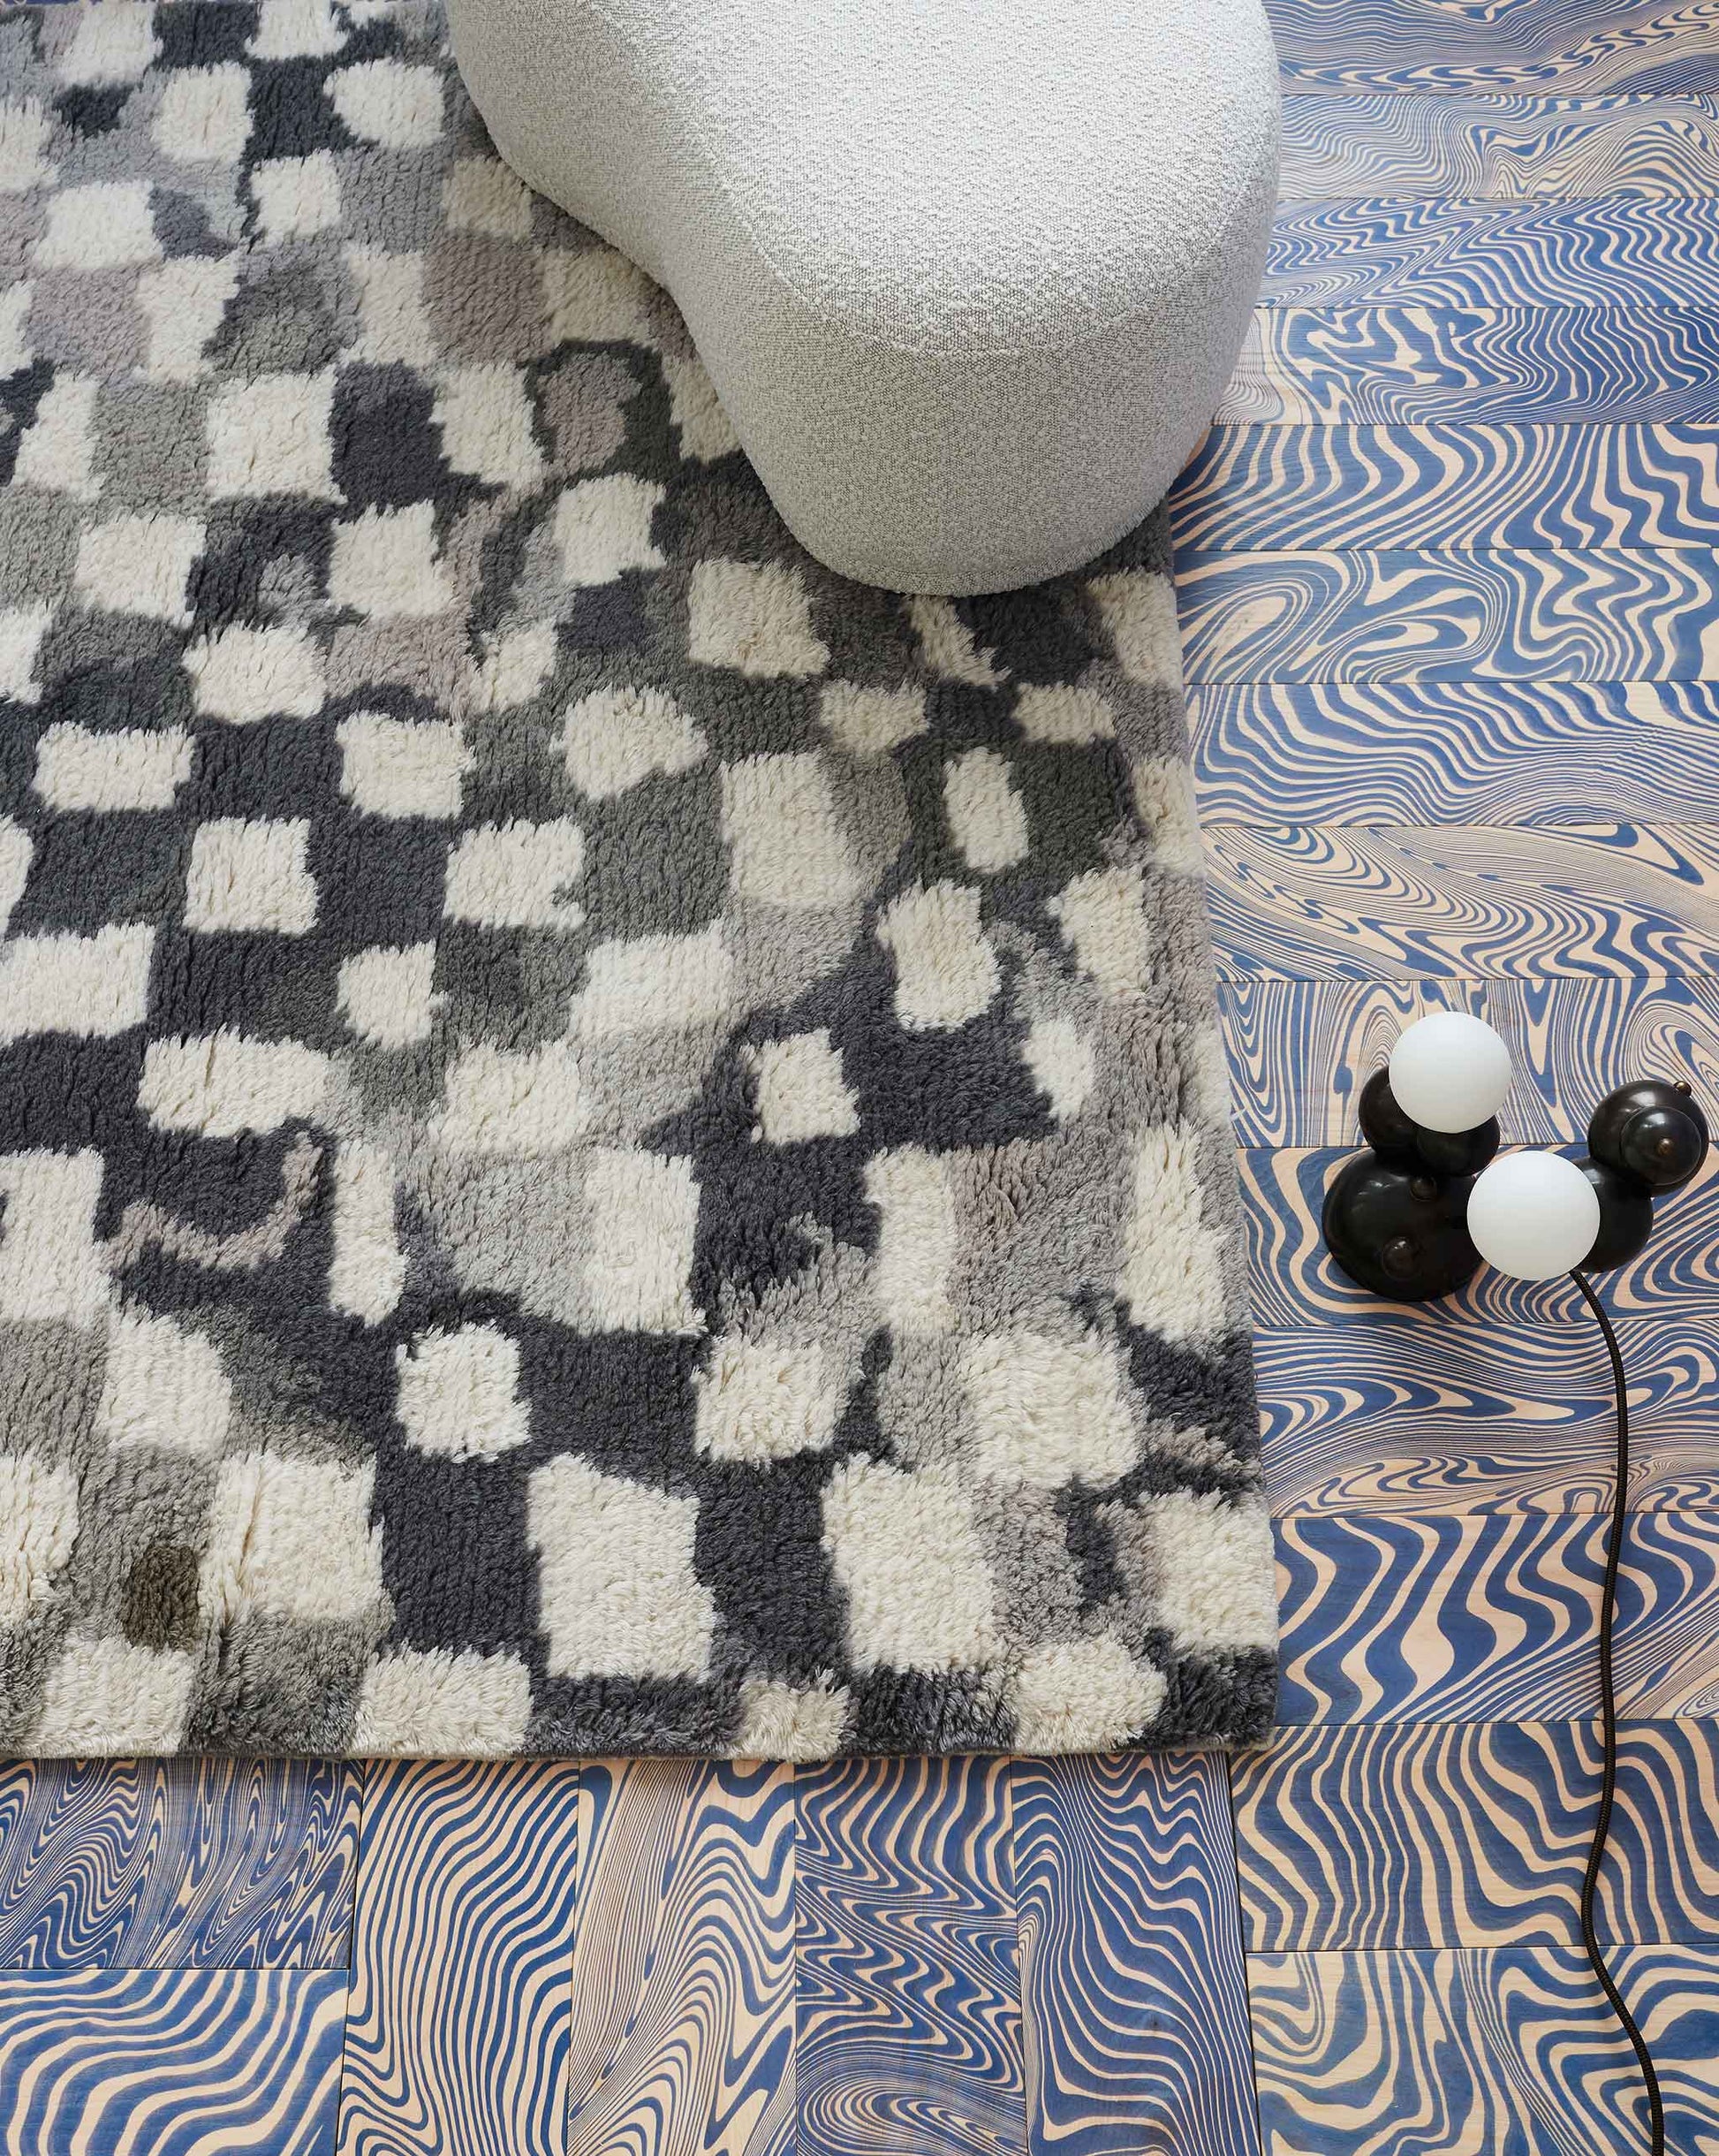 A Chess Hand Knotted Rug 5' x 8' in Greyscale with a blue and white Moroccan weave pattern on it